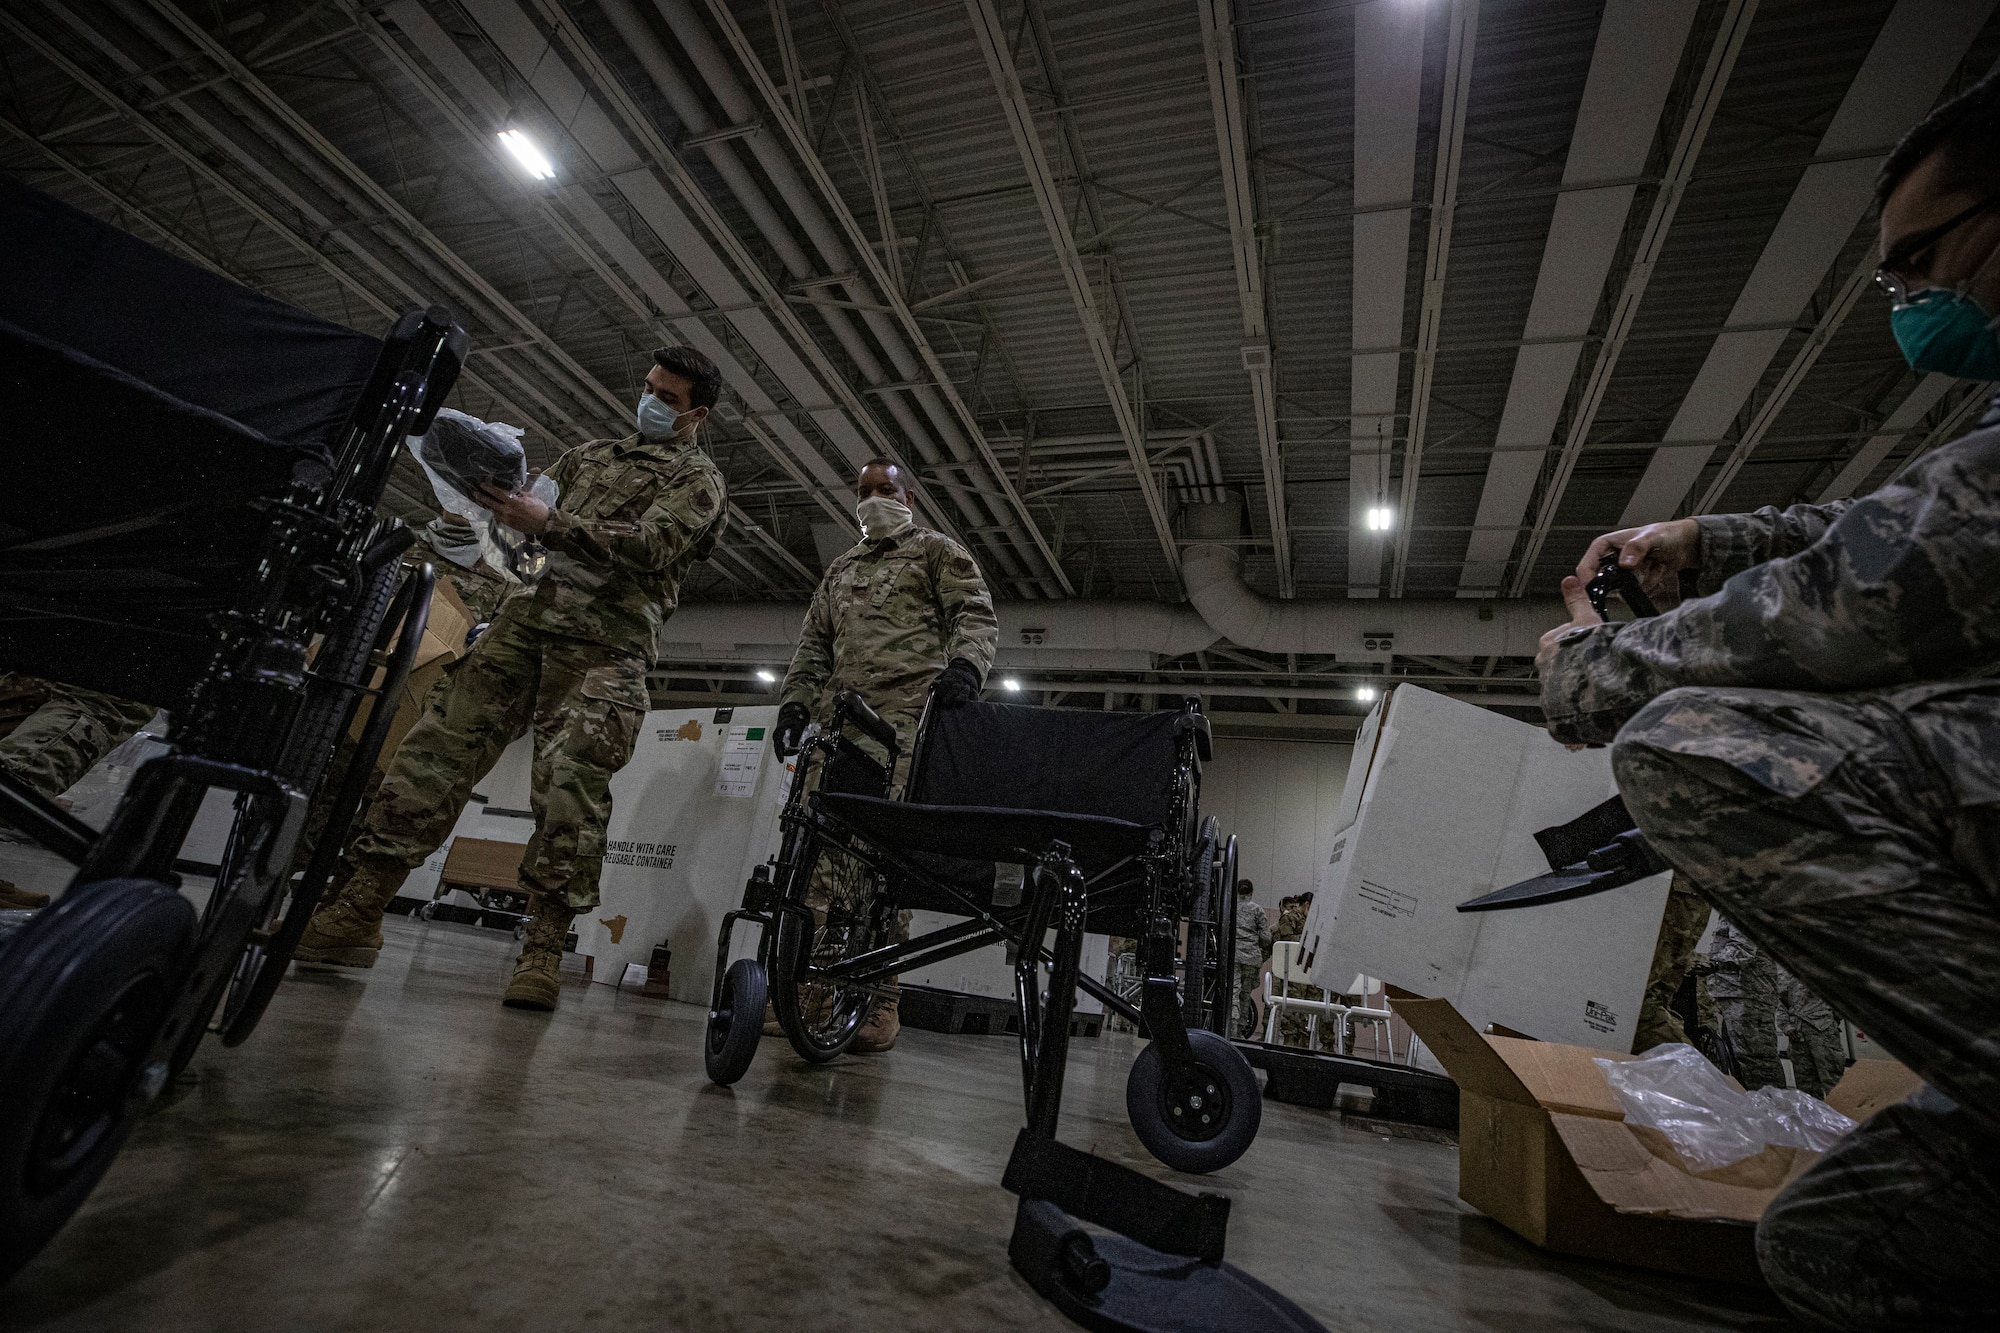 New Jersey Air National Guard Airmen put together wheelchairs during the buildup of a Field Medical Station at the Atlantic City Convention Center in Atlantic City, N.J., April 9, 2020.  Atlantic City is one of three stations that will offer overflow from local hospitals focused on COVID-19 patients. (U.S. Air National Guard photo by Master Sgt. Matt Hecht)